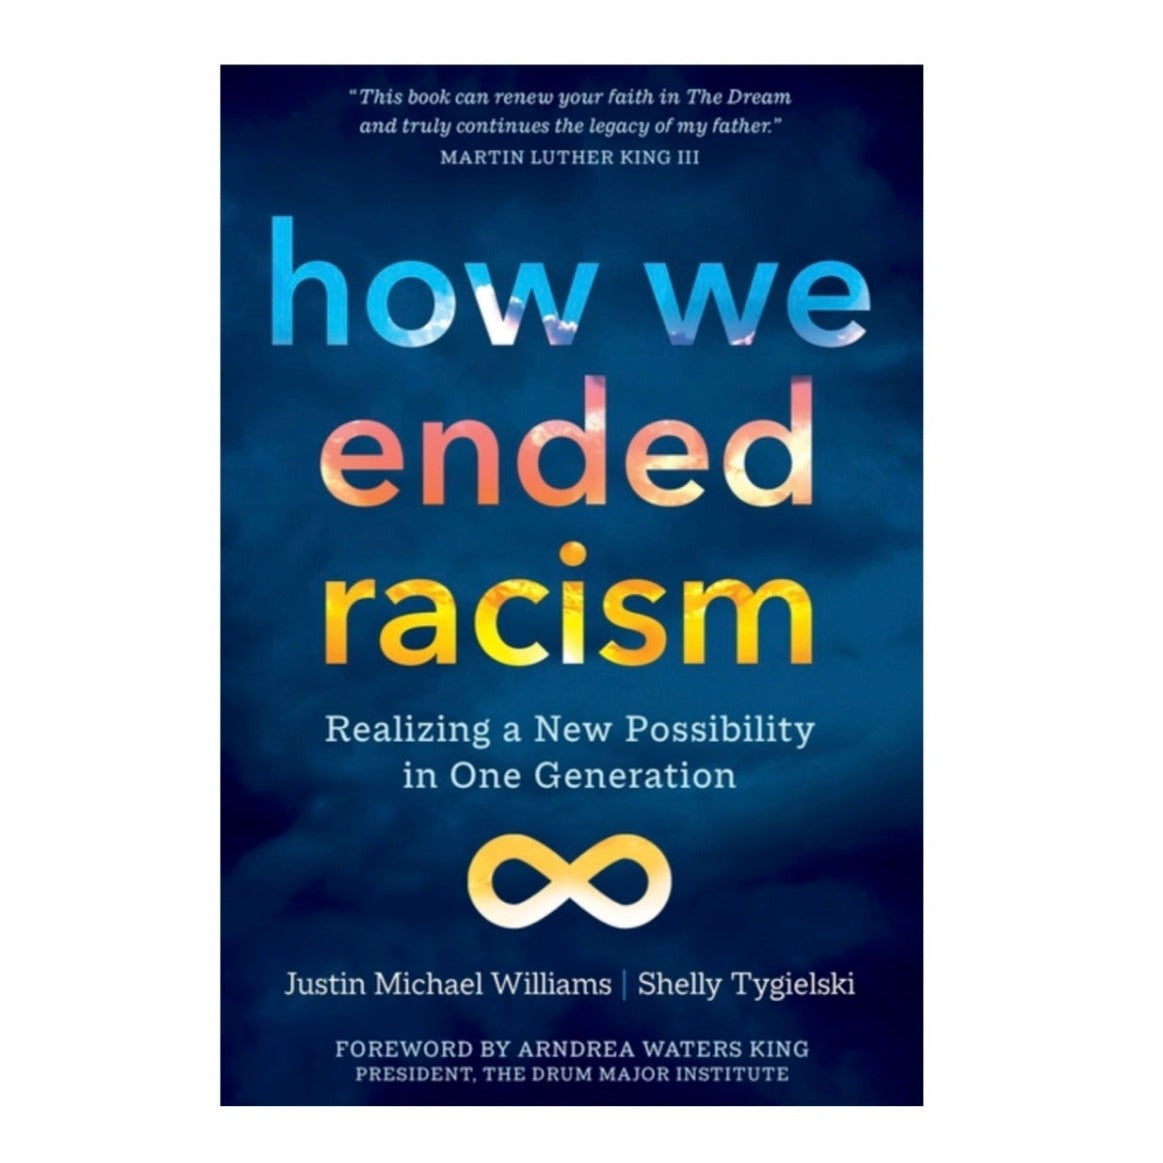 How We Ended Racism by Justin Michael Williams & Shelly Tygielski